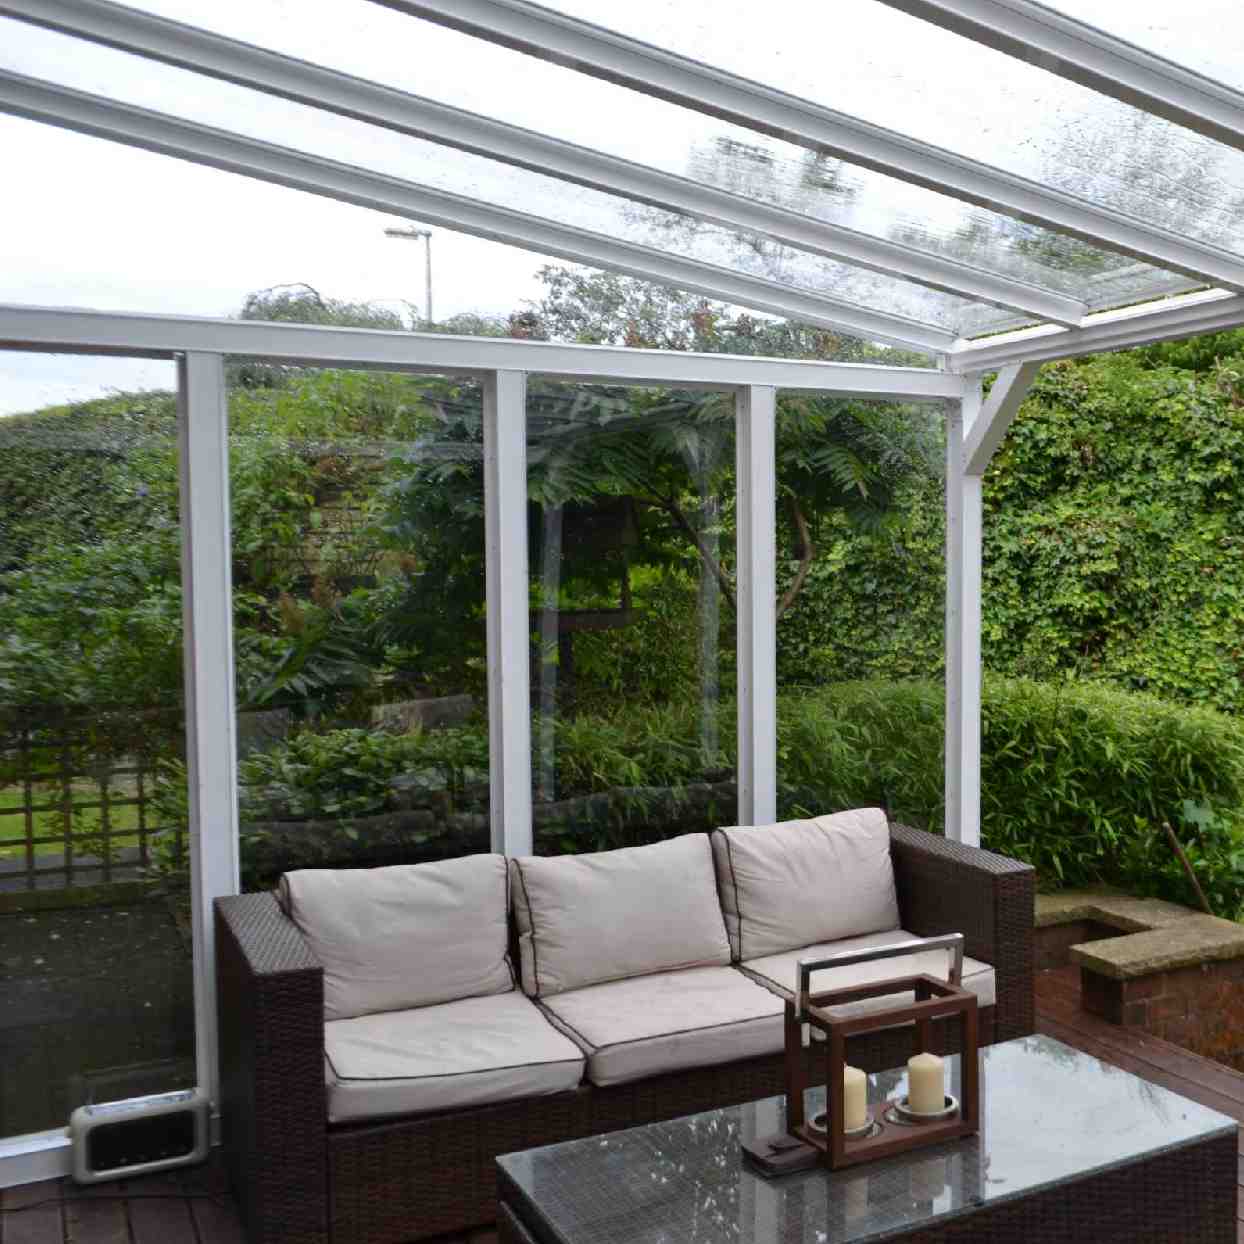 Buy Omega Verandah White with 6mm Glass Clear Plate Polycarbonate Glazing - 5.6m (W) x 2.5m (P), (3) Supporting Posts online today